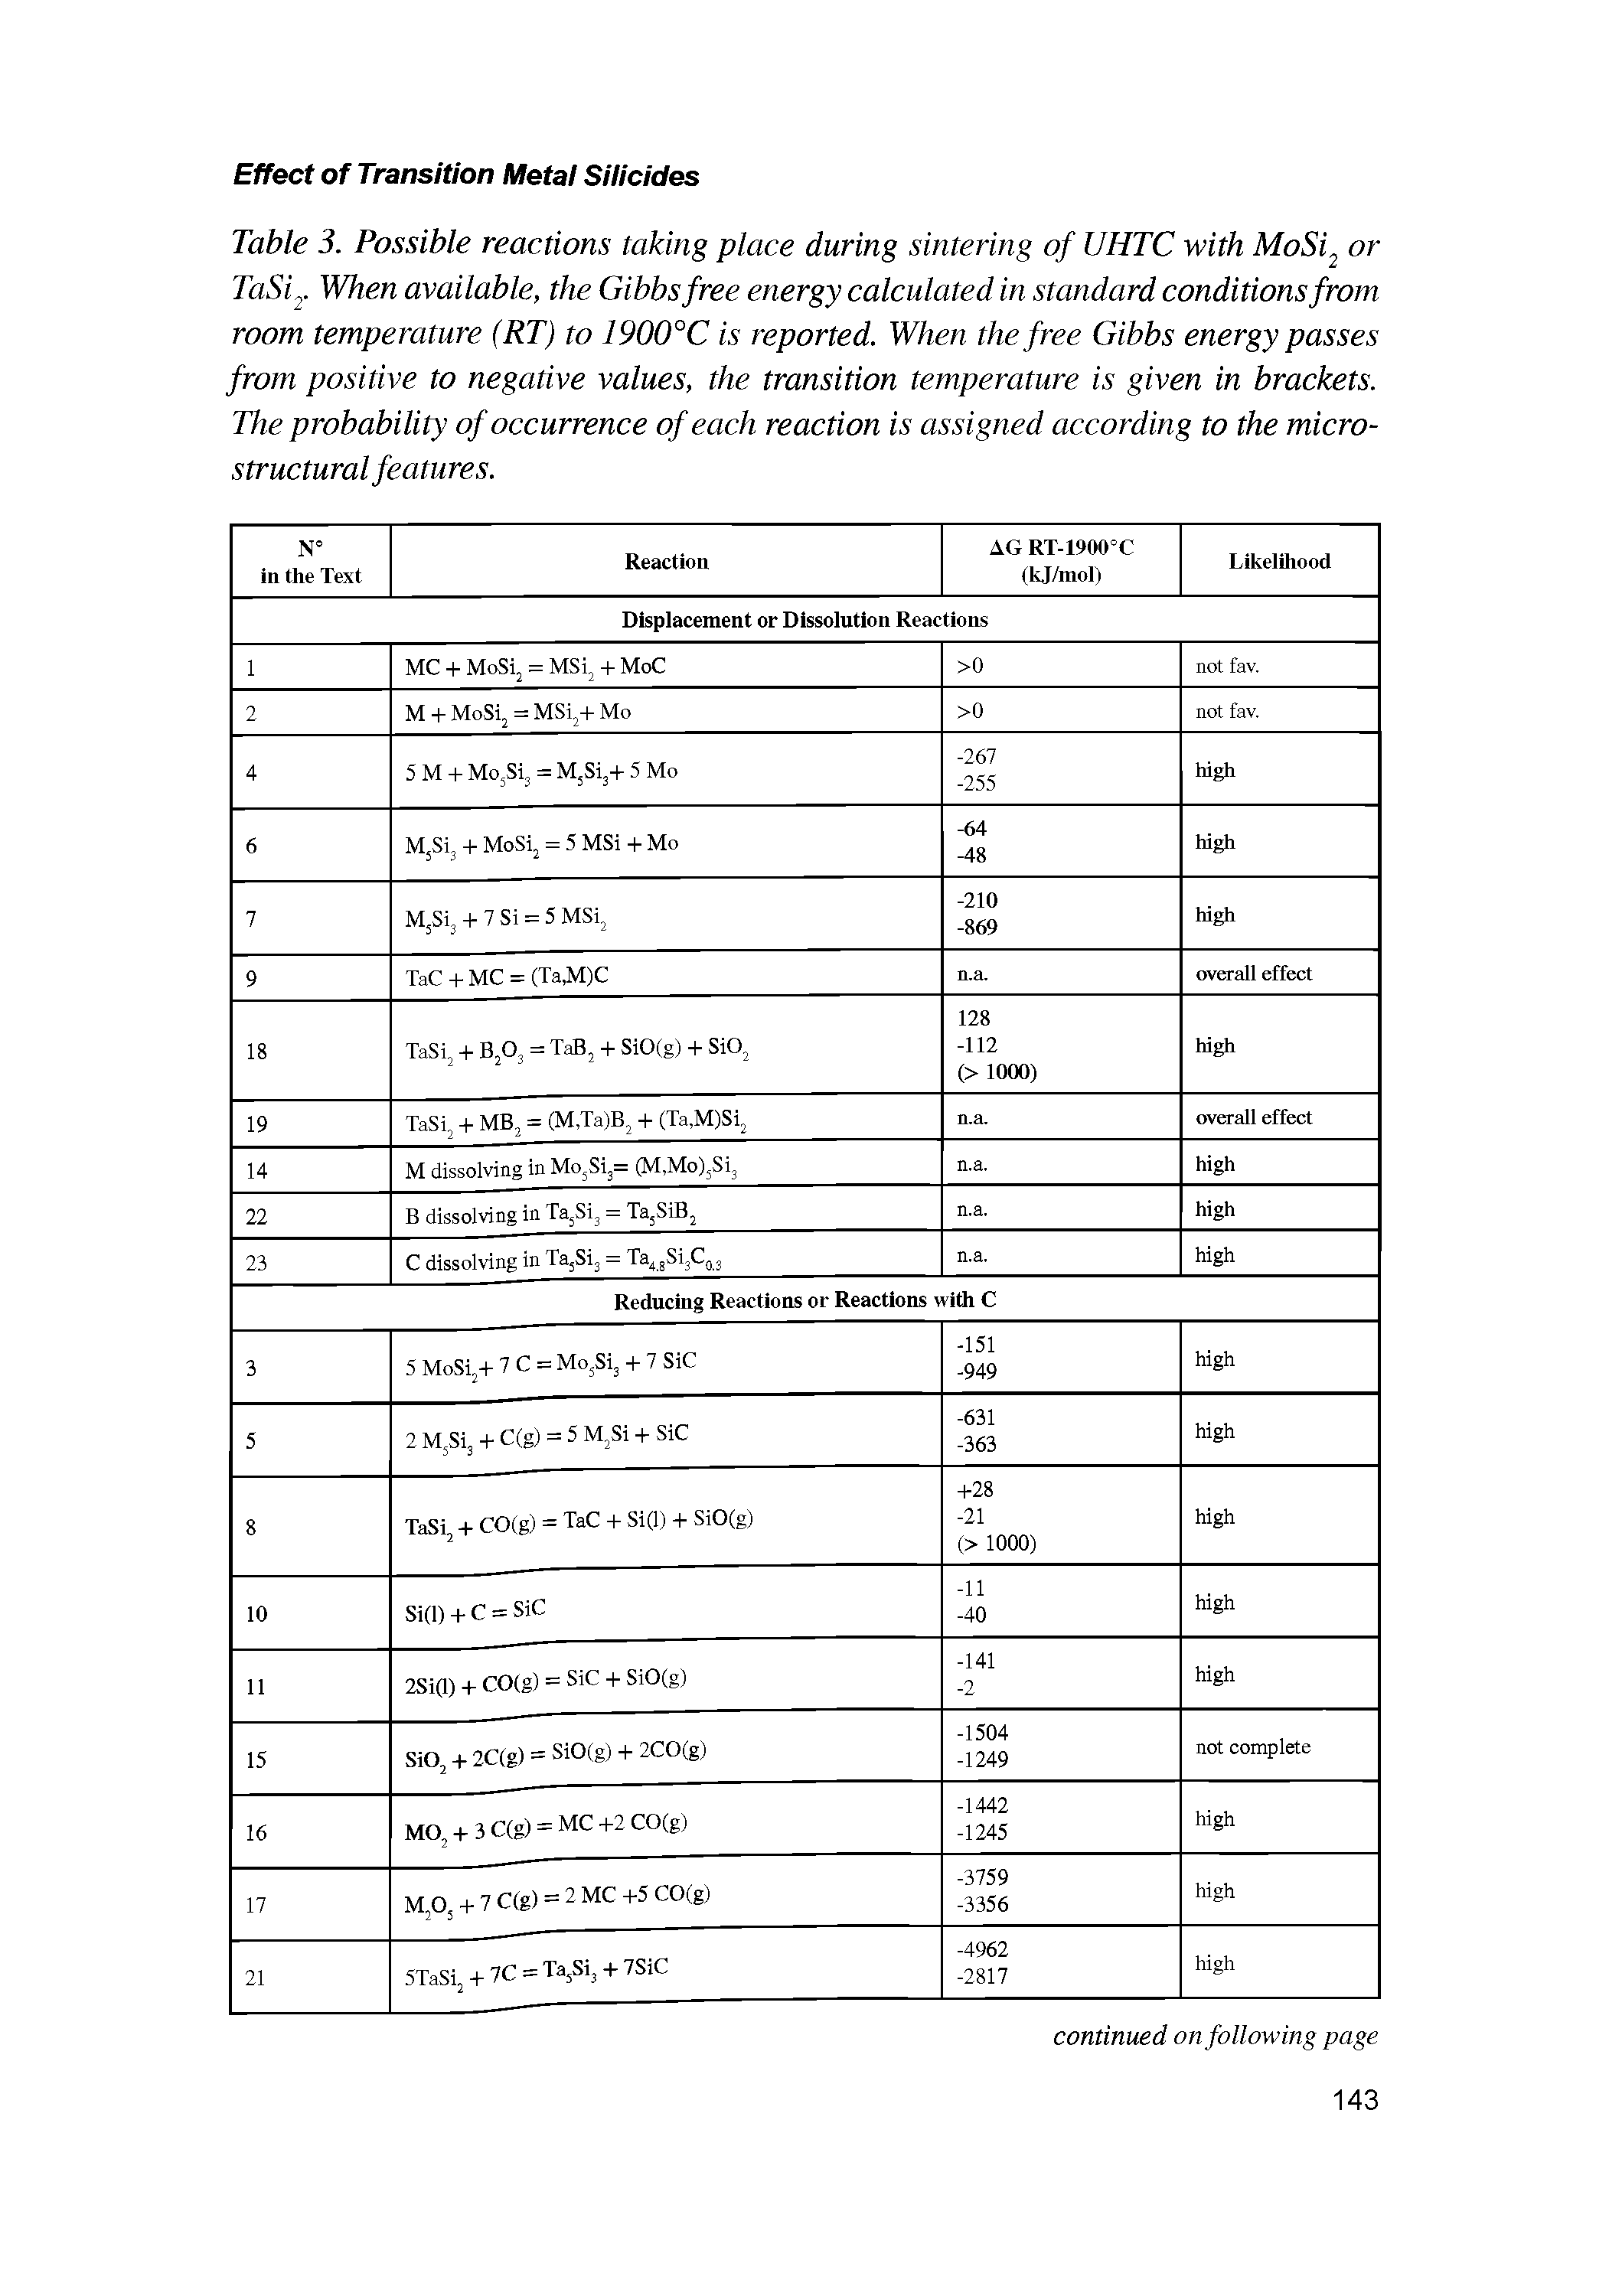 Table 3. Possible reactions taking place during sintering of UHTC with MoSi or TaSi. When available, the Gibbs free energy calculated in standard conditions from room temperature (RT) to 1900°C is reported. When the free Gibbs energy passes from positive to negative values, the transition temperature is given in brackets. The probability of occurrence of each reaction is assigned according to the micro-structural features.